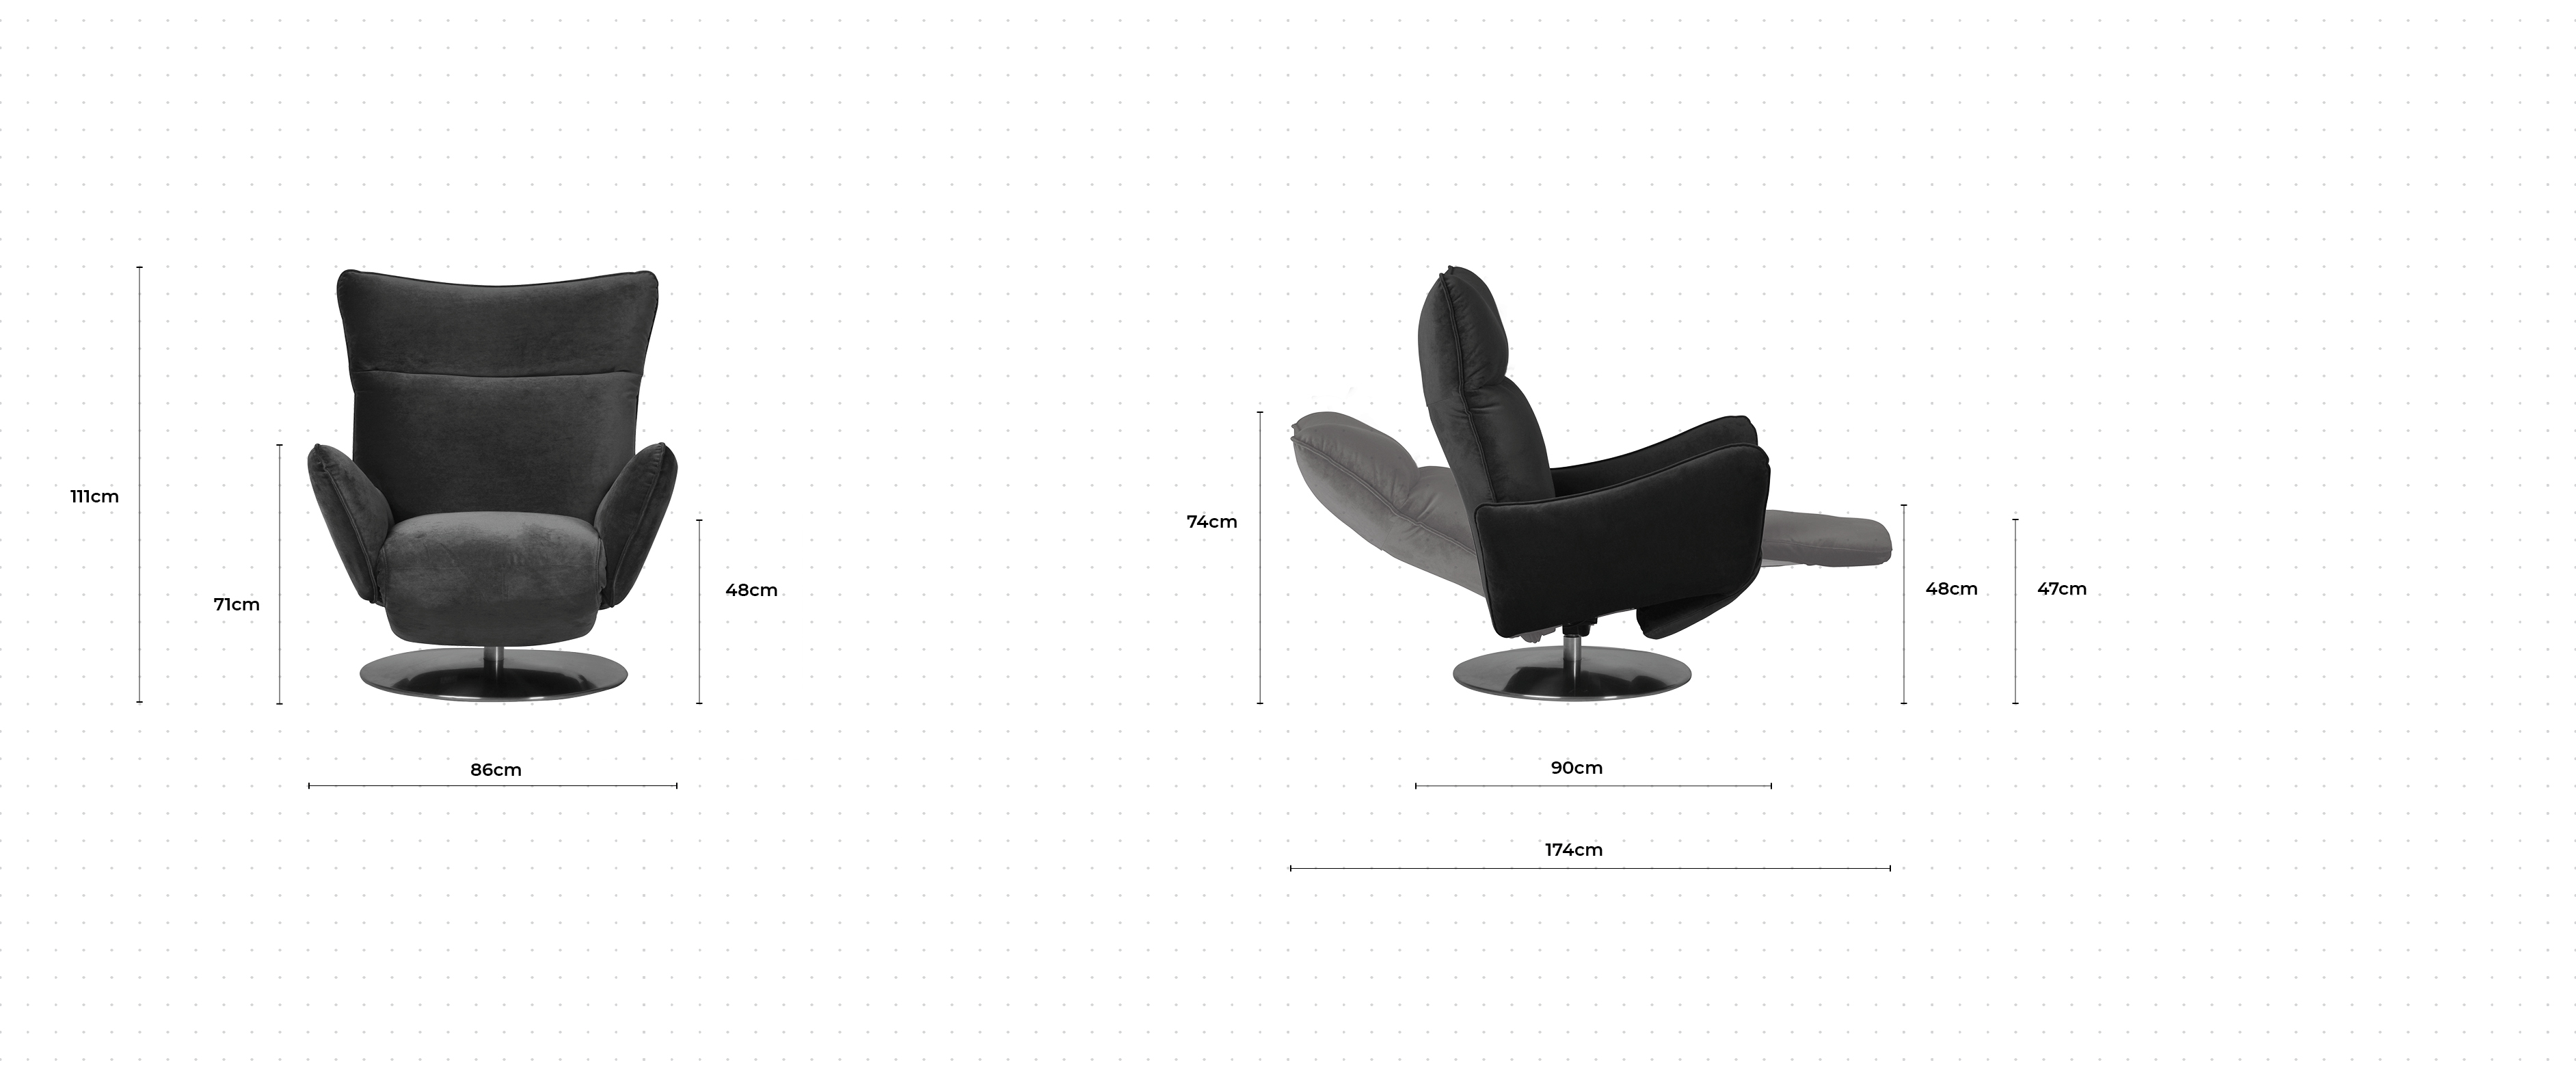 Ritchie Swivel Armchair dimensions